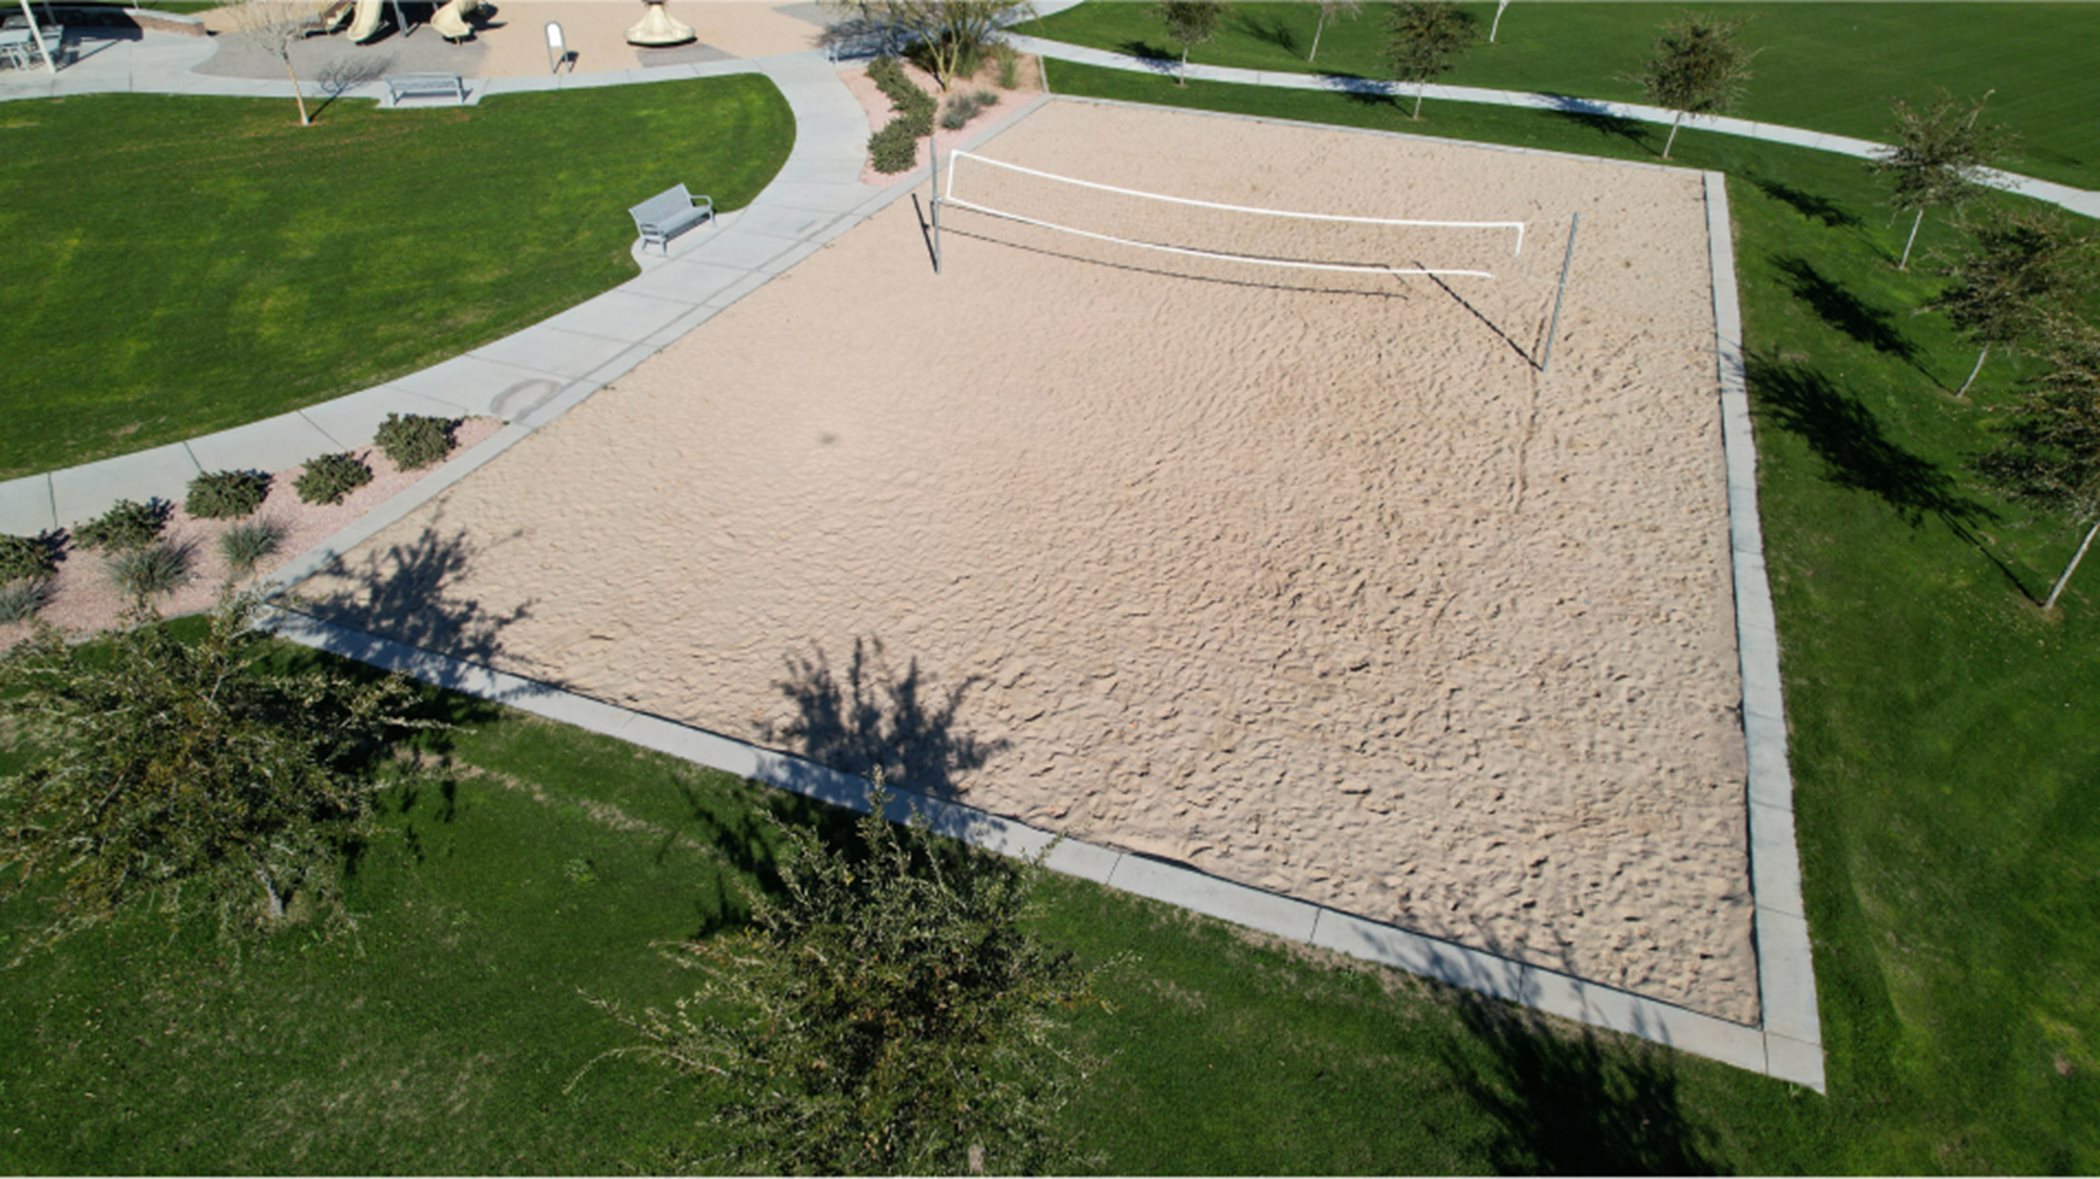 Beach volleyball court in daylight sideview